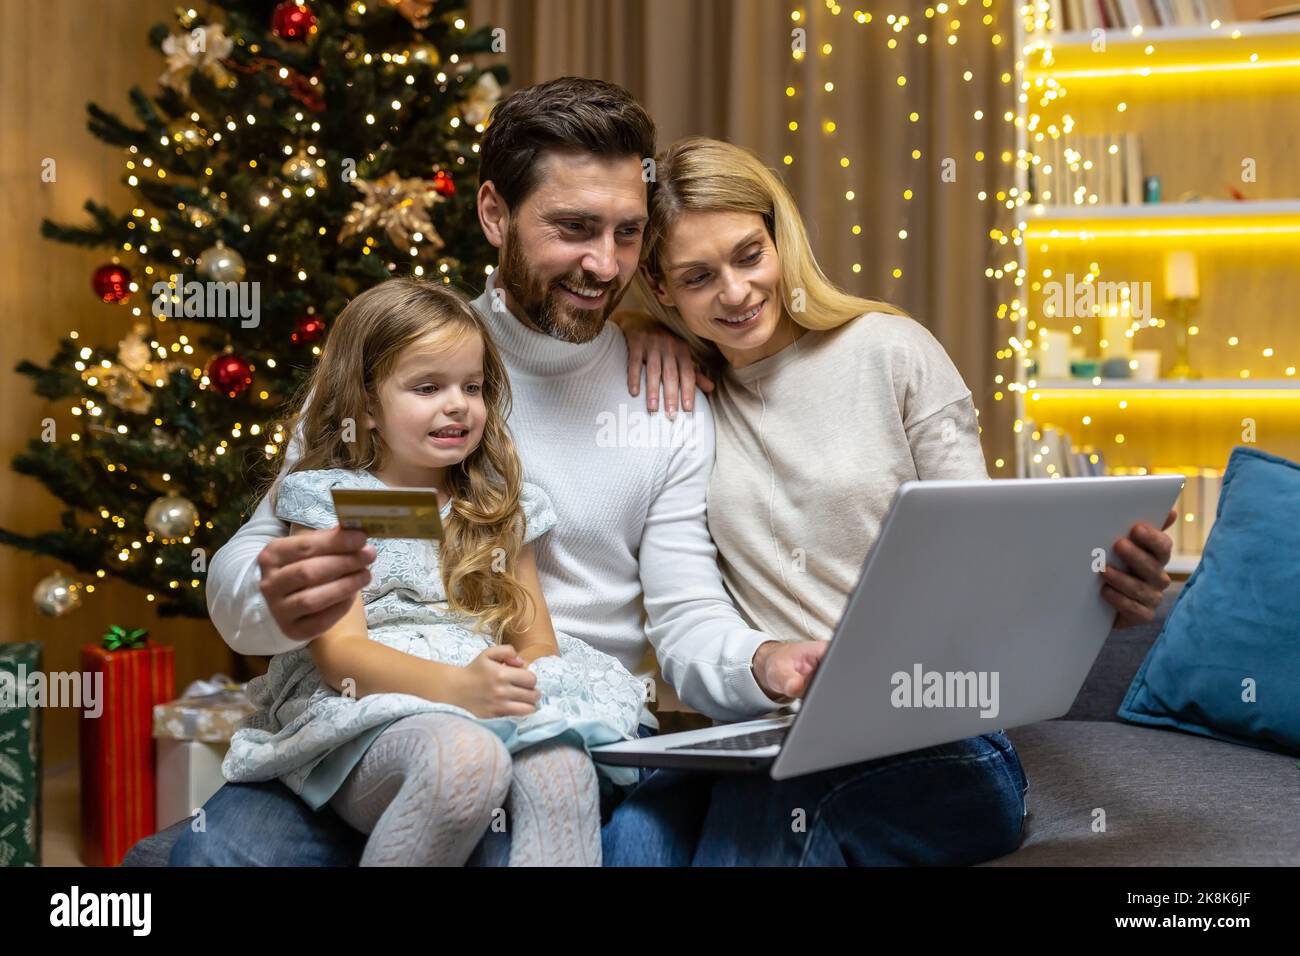 Christmas family, husband wife and little daughter for Christmas at home make online shopping in online store remotely, smiling and happy, husband holding bank credit card and laptop choosing gifts. Stock Photo